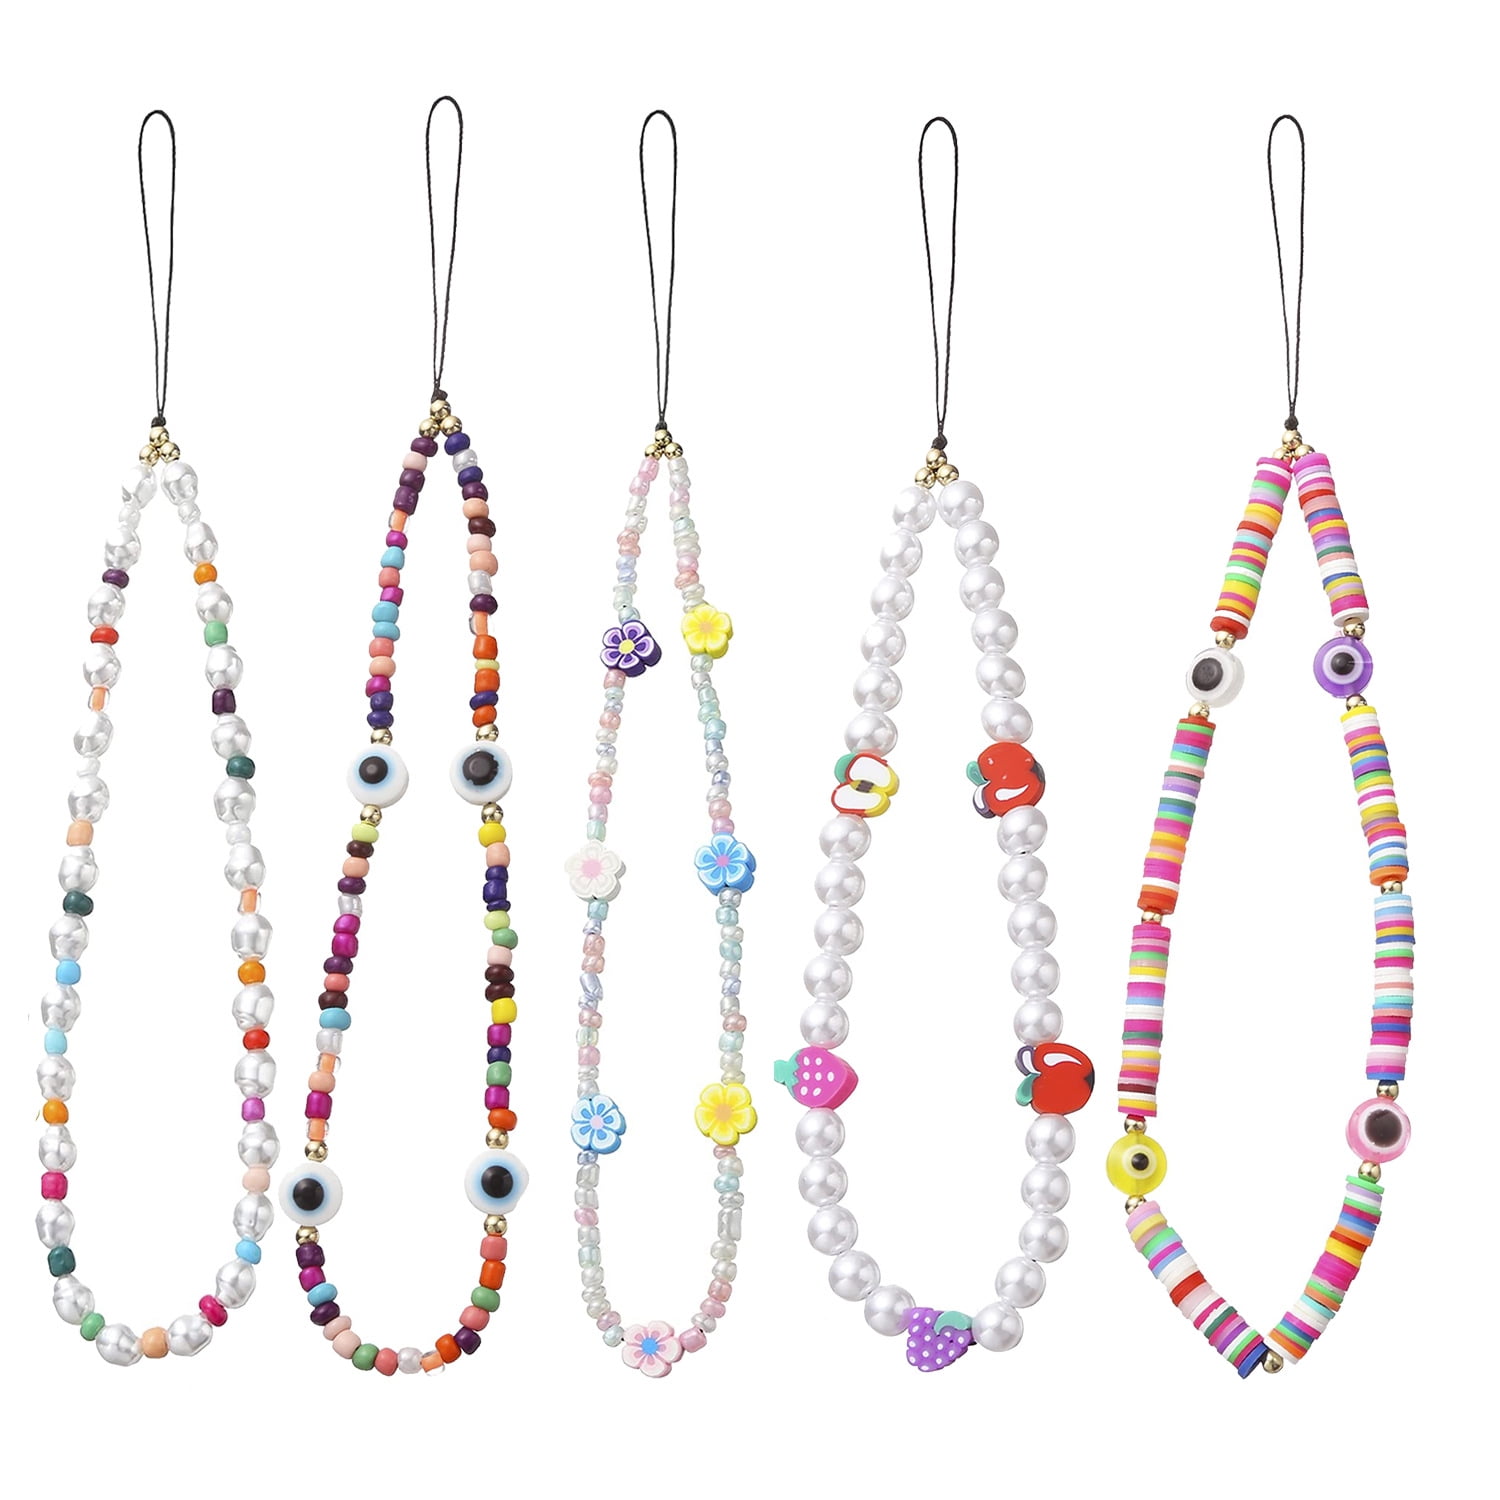 Fruit Star Pearl Rainbow Color Smiley Face Charm Beaded Phone Chain Strap for Women Girl Size : 5PCS Wrist Lanyard Hand Strap Beaded Phone Wrist Rope Bracelet String for Cell Phone 